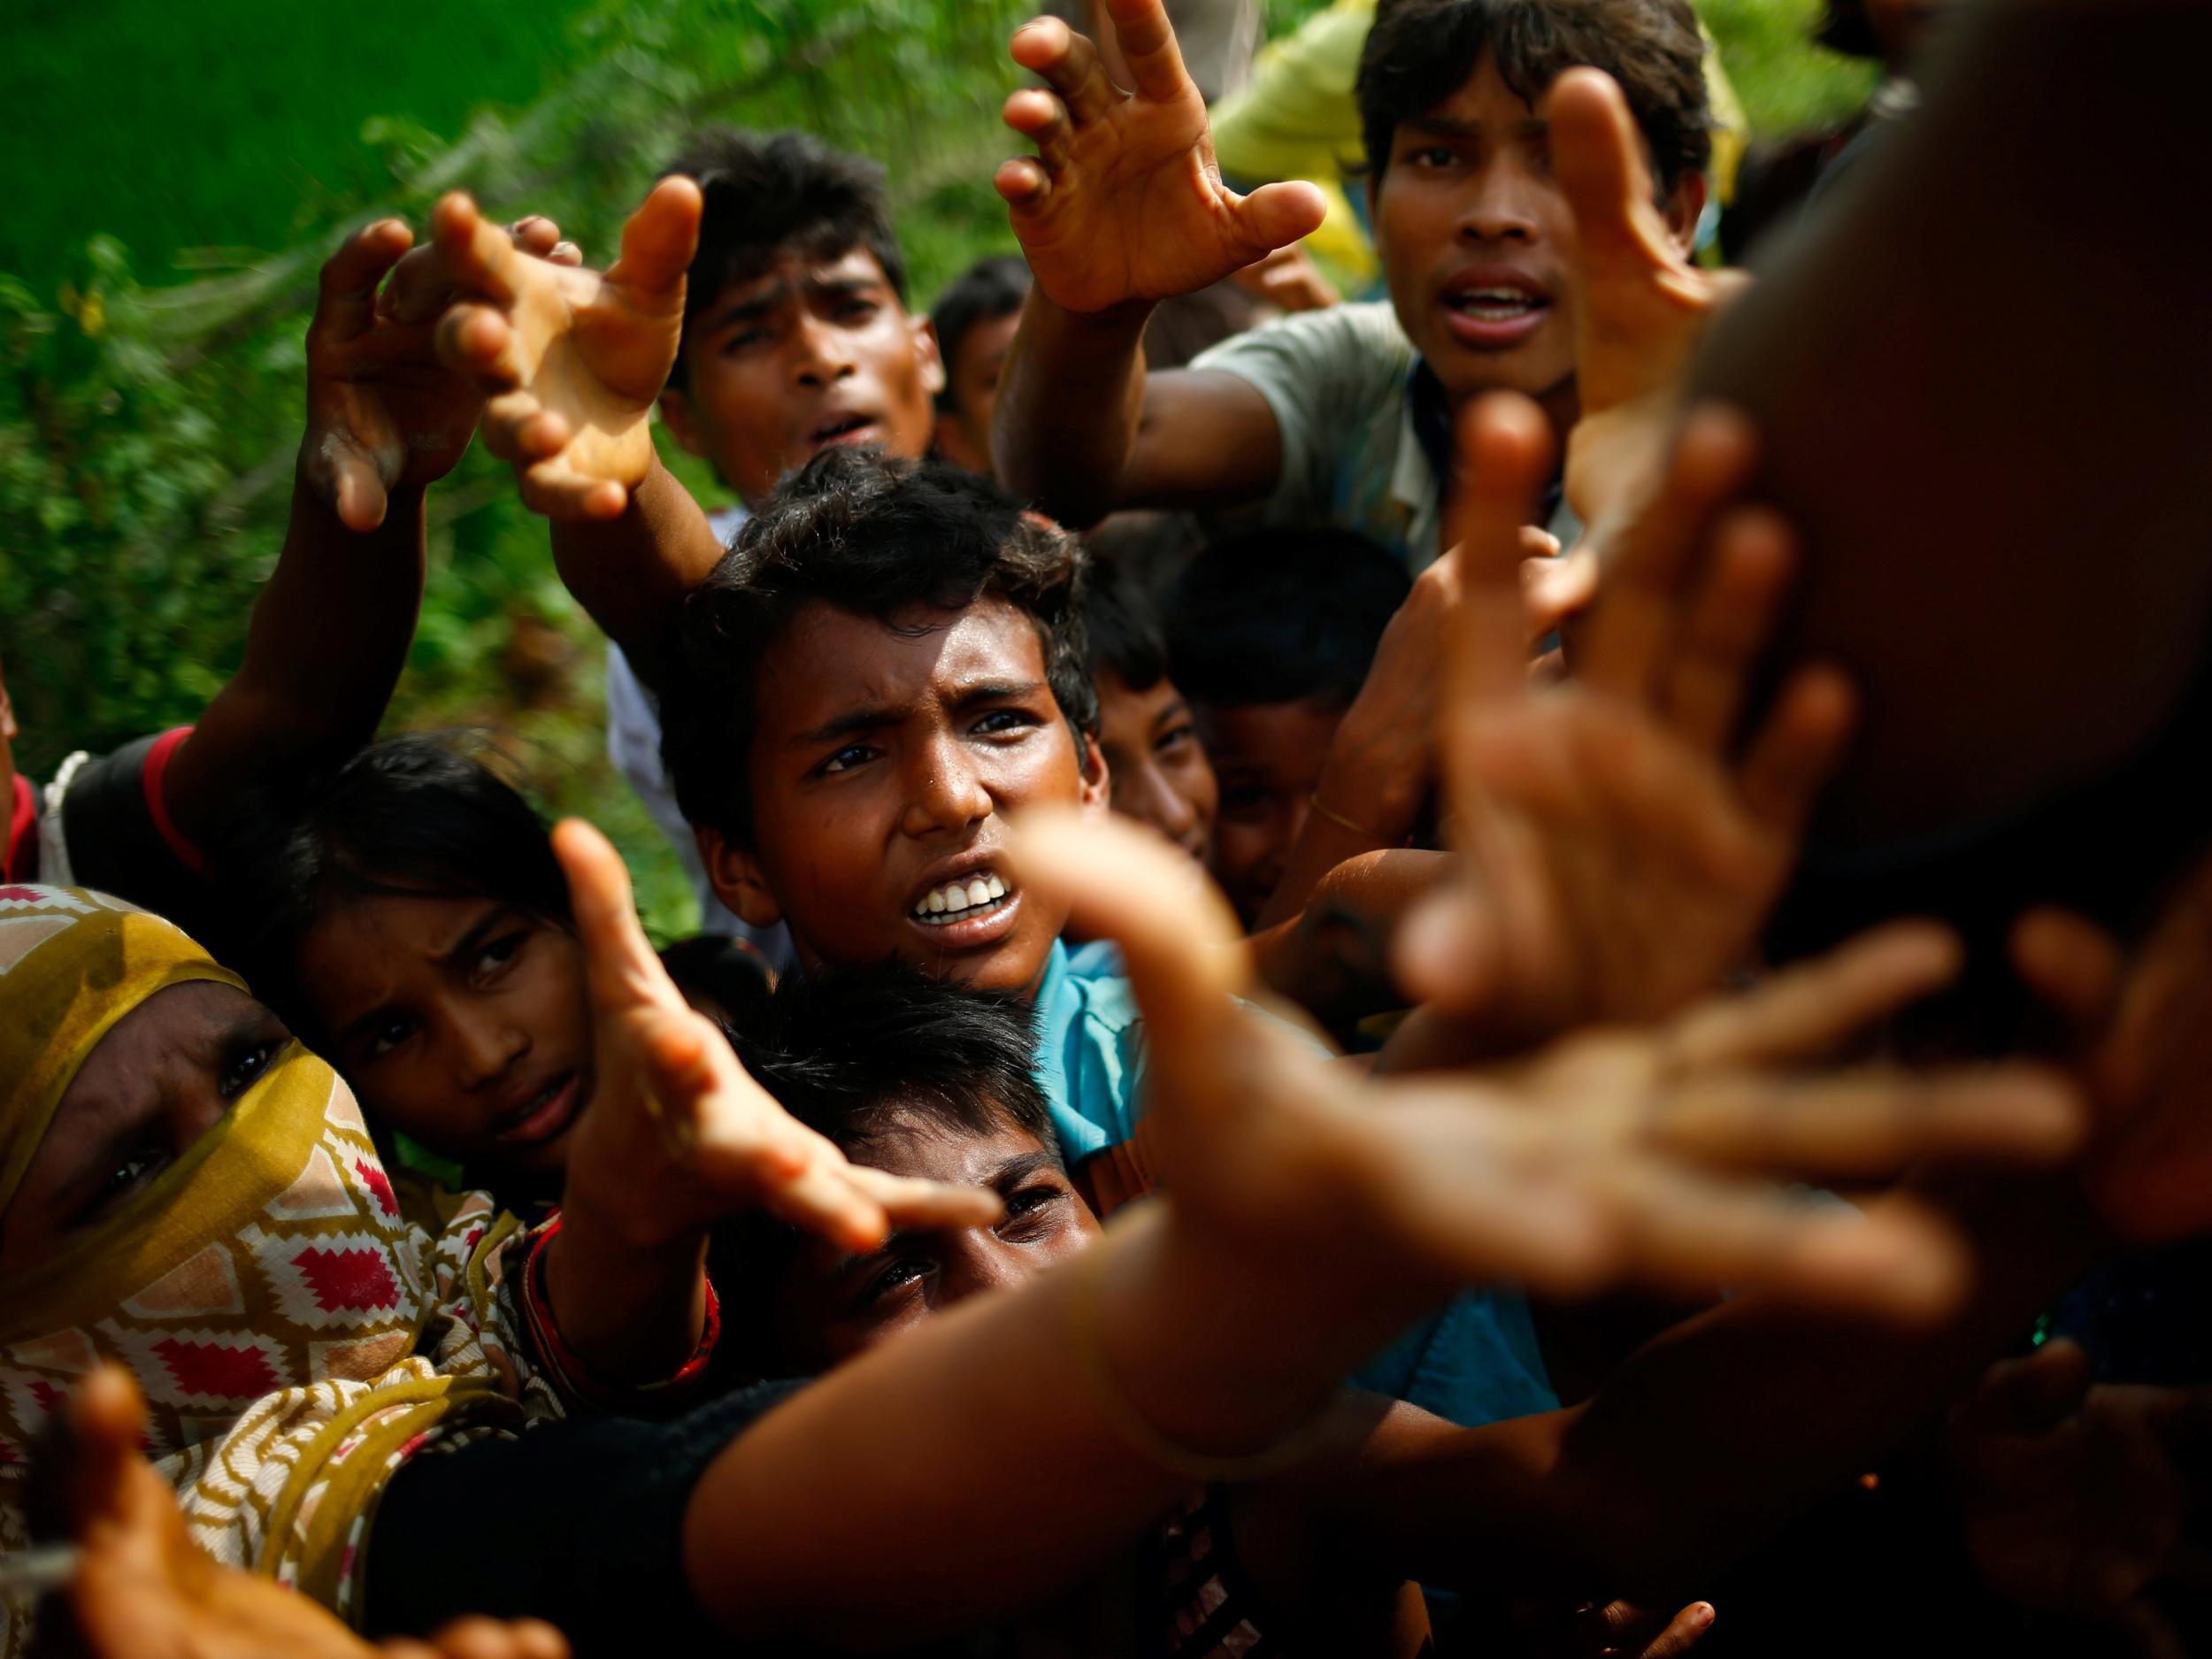 Rohingya refugees are fleeing to Bangladesh amid sustained persecution